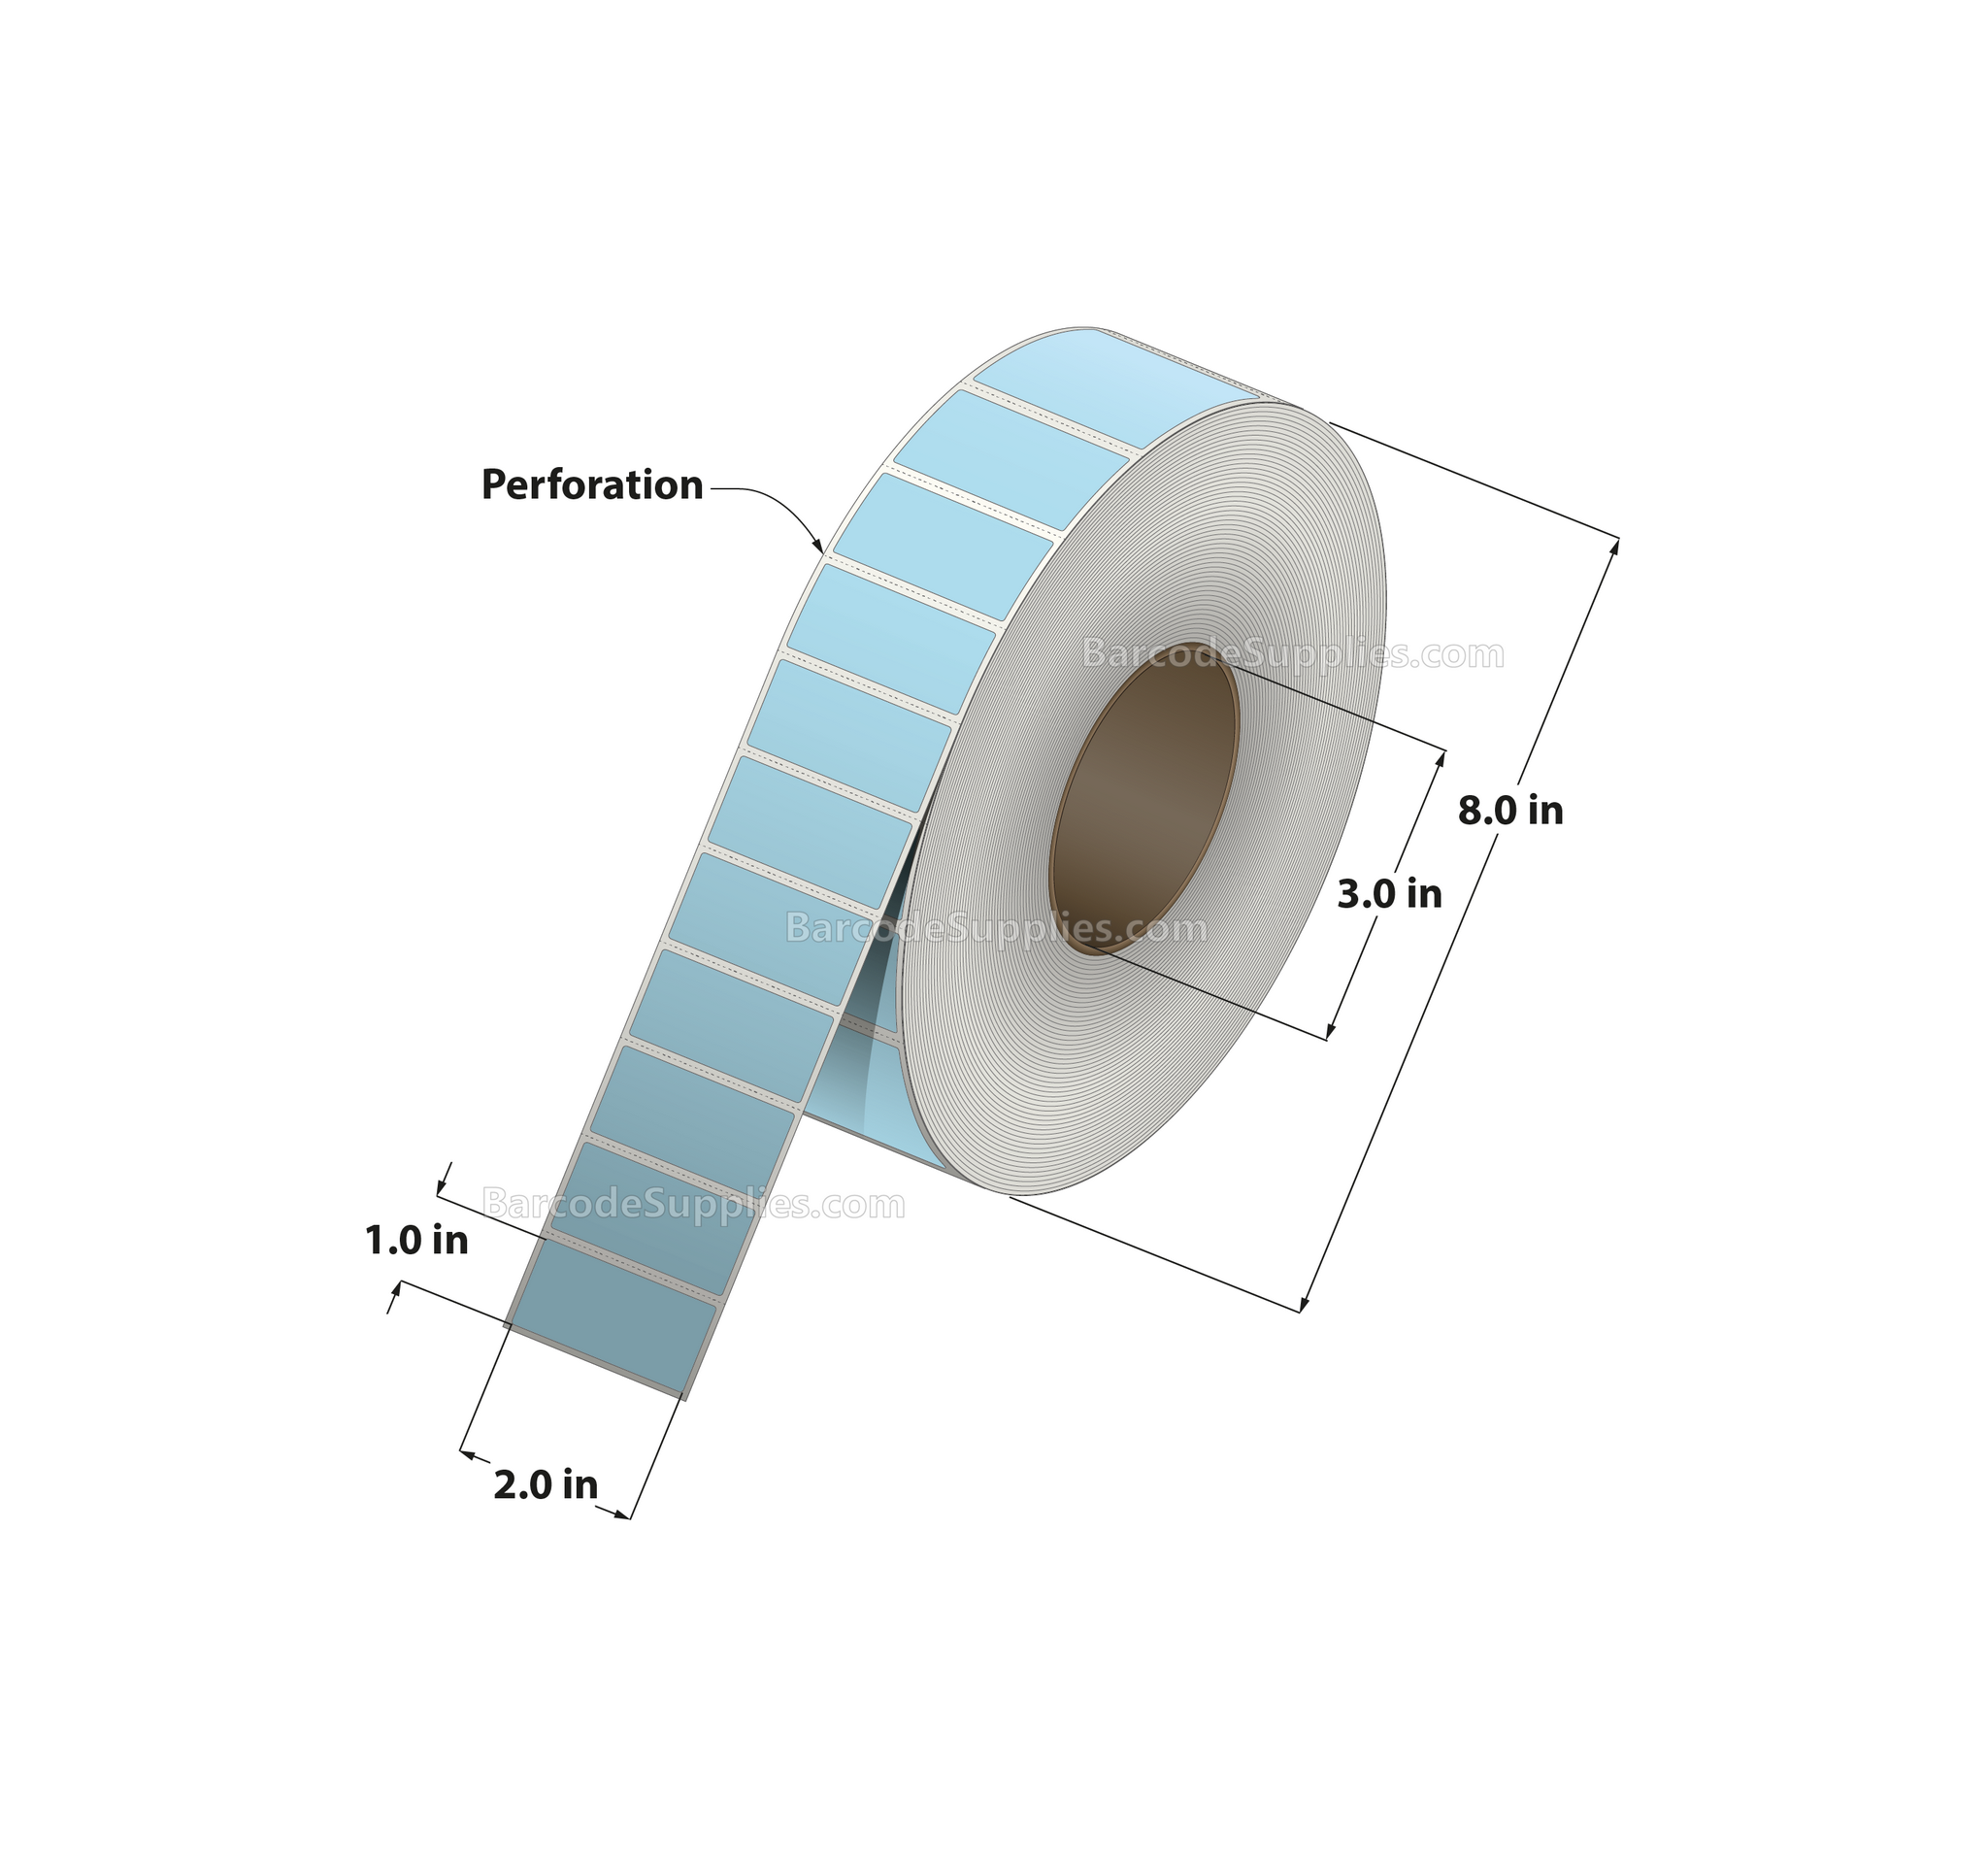 2 x 1 Thermal Transfer 290 Blue Labels With Permanent Adhesive - Perforated - 5500 Labels Per Roll - Carton Of 8 Rolls - 44000 Labels Total - MPN: RFC-2-1-5500-BL